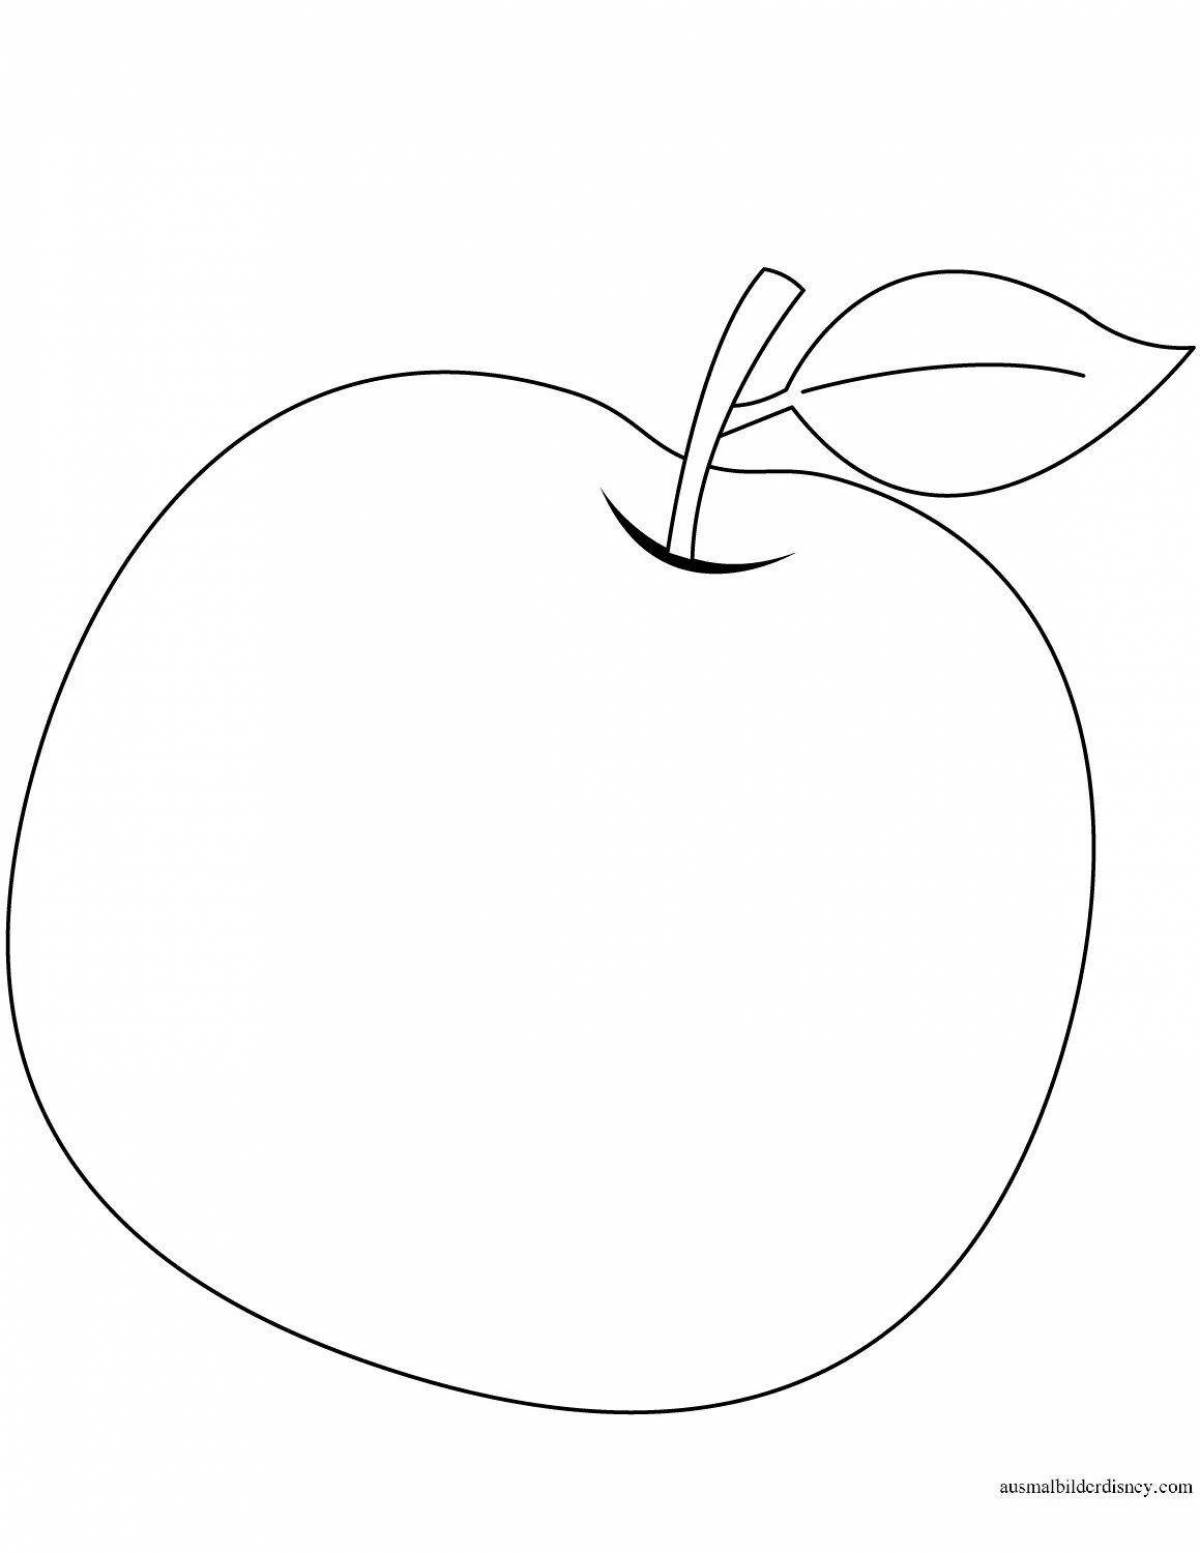 Adorable apple pattern coloring page